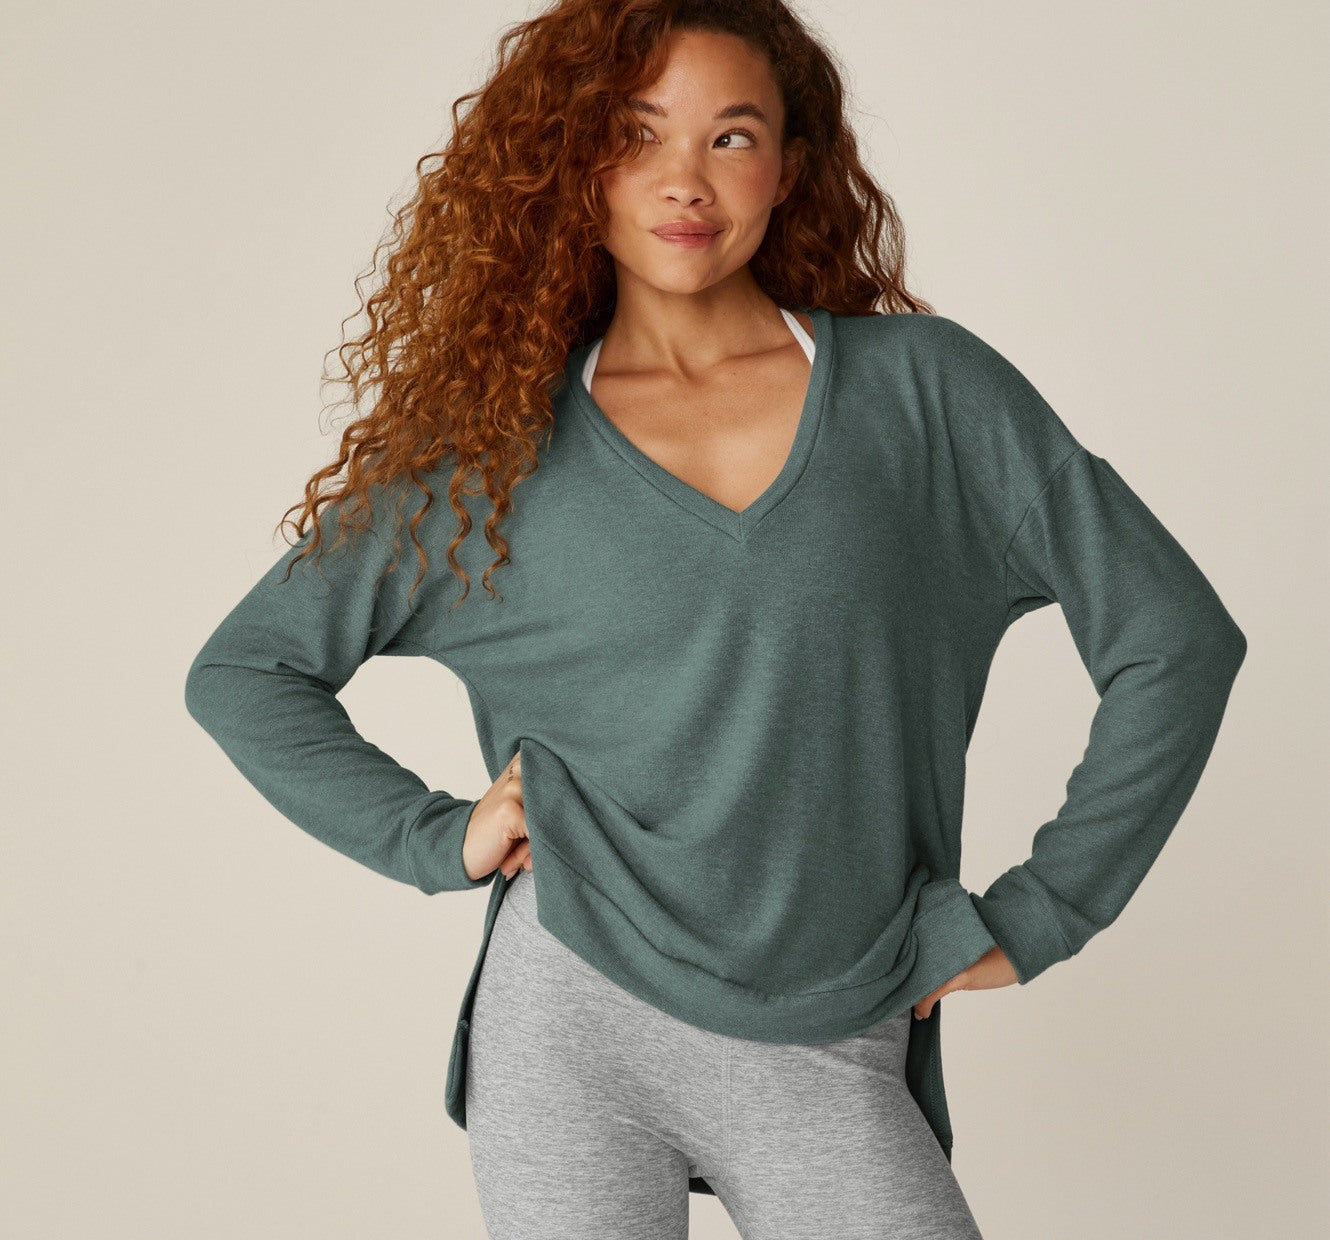 model is wearing a green v-neck sweater. 